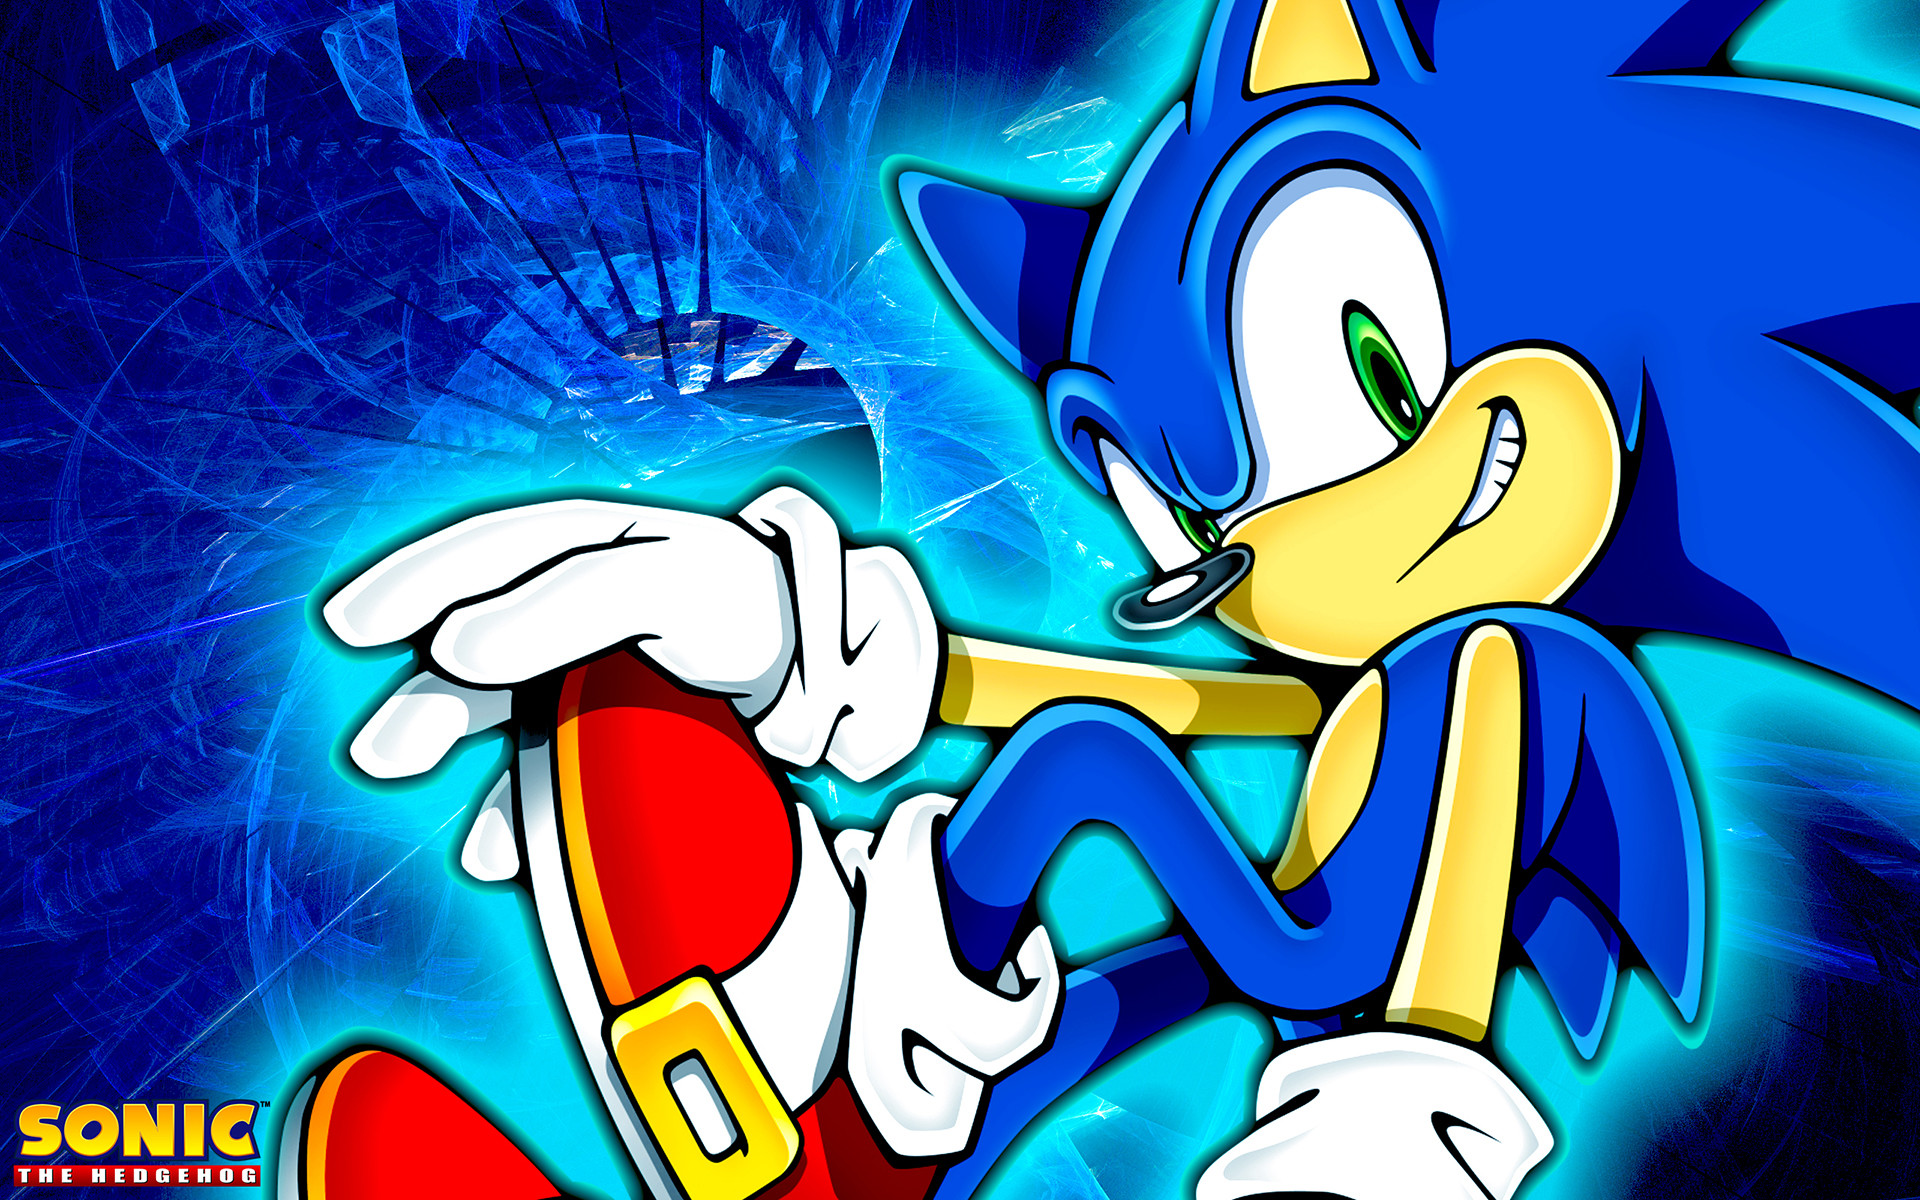 Classic Sonic The Hedgehog And Friends Wallpaper by